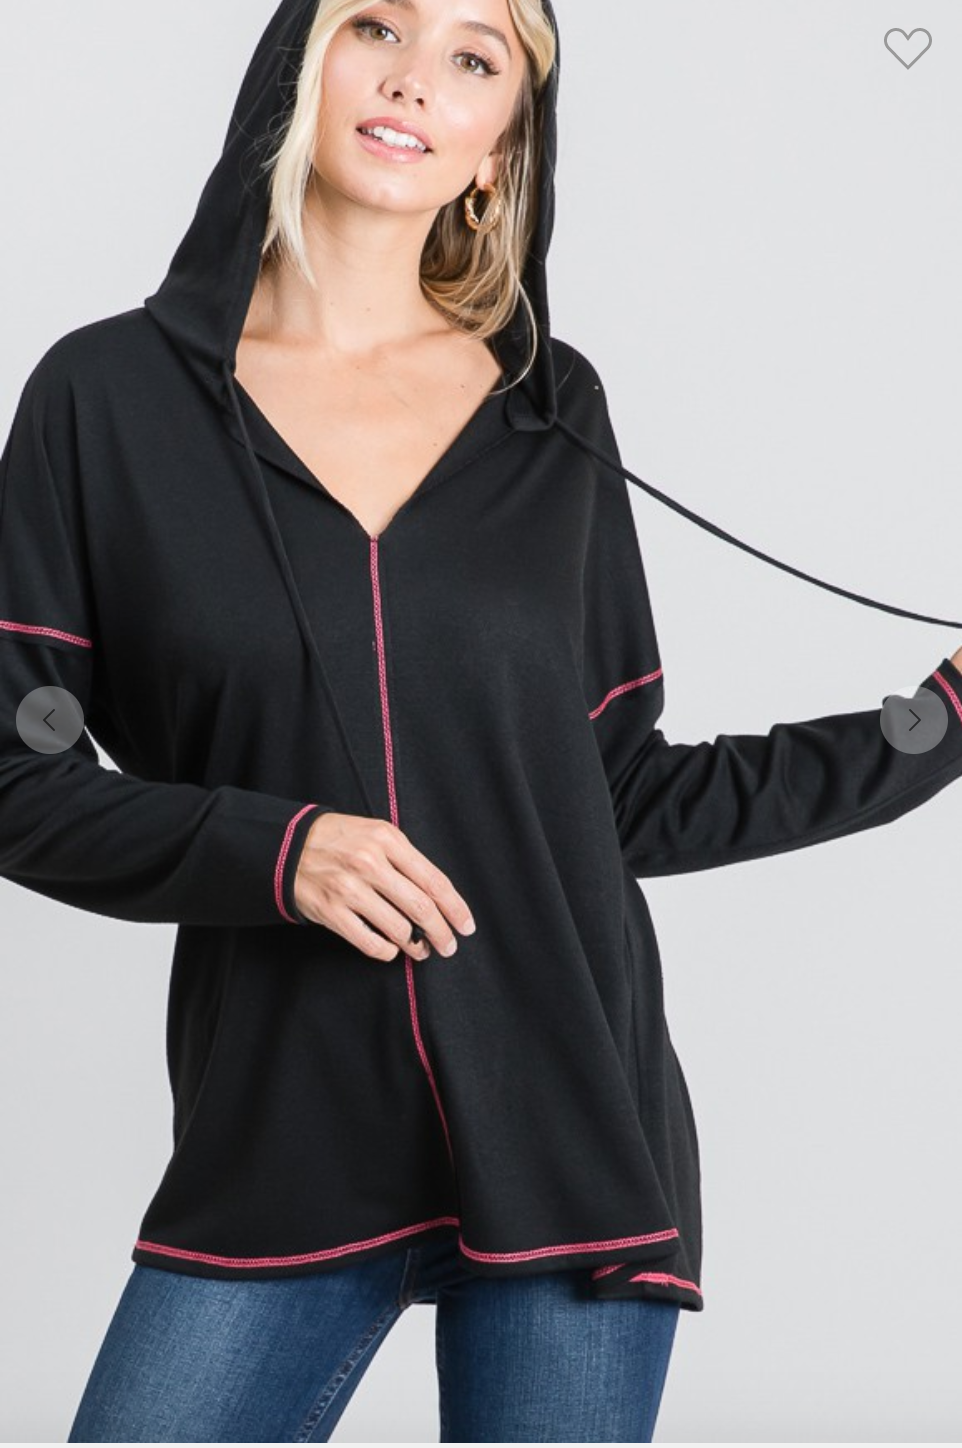 LONG SLEEVE V NECK SOLID HOODED TOP WITH STITCH DETAIL